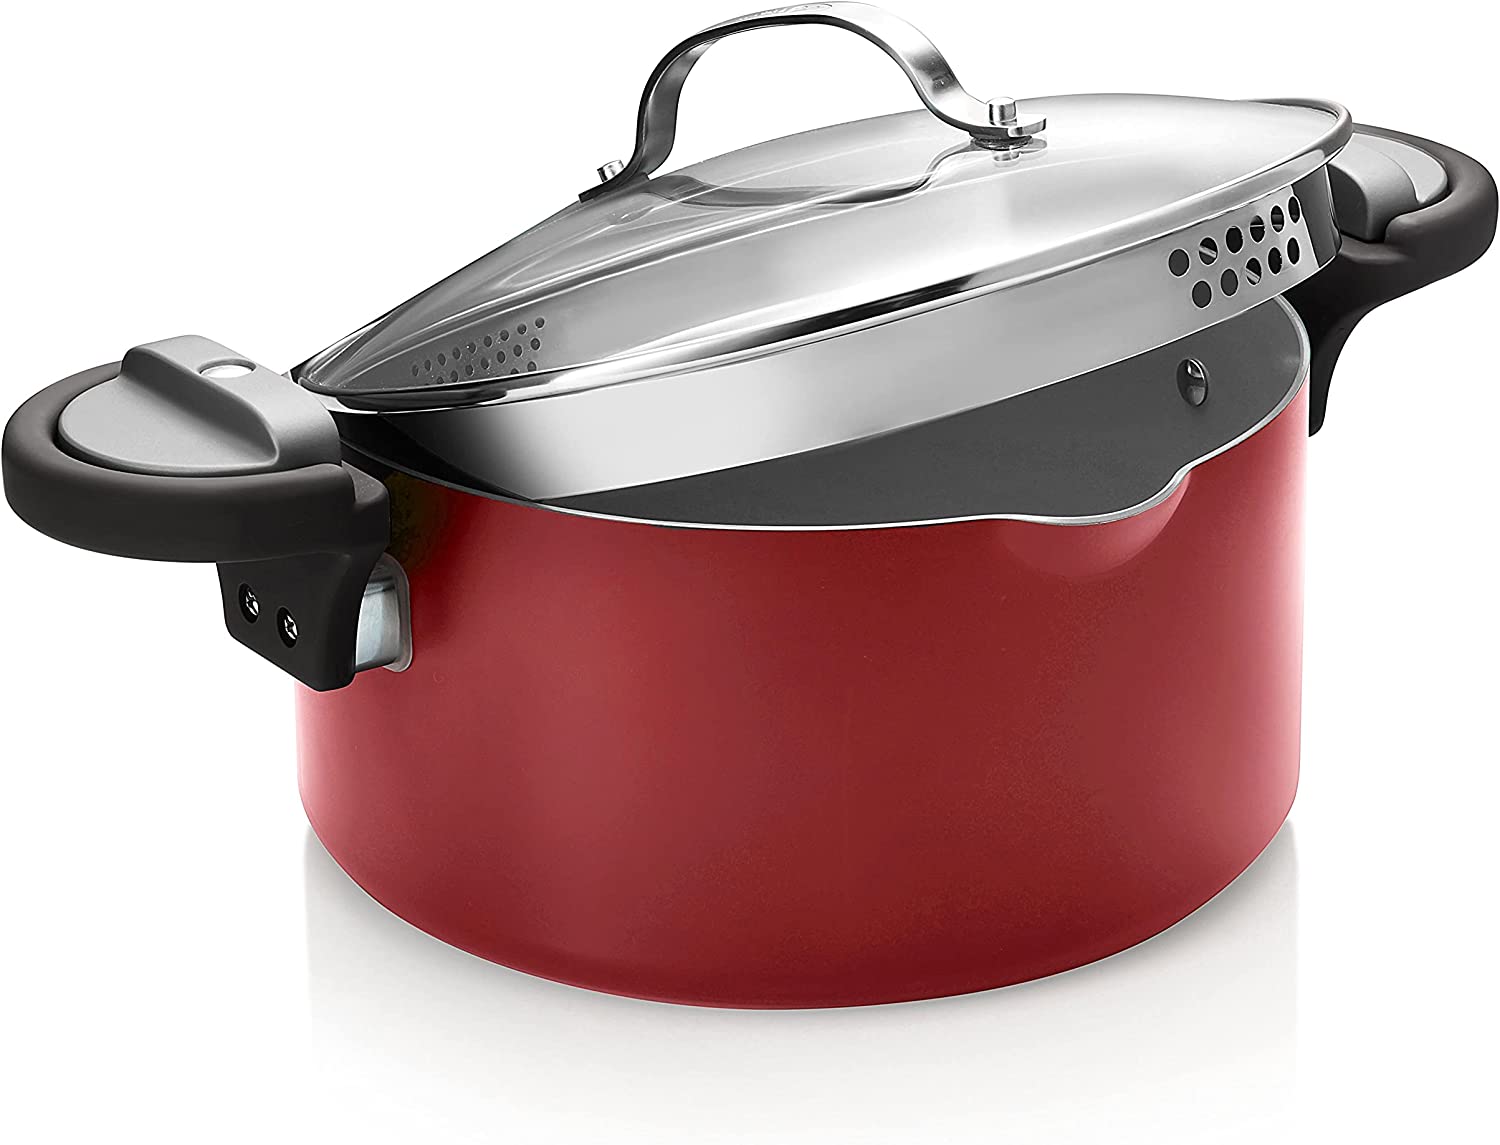 Gotham steel 5 Quart Pot to cook rice color red